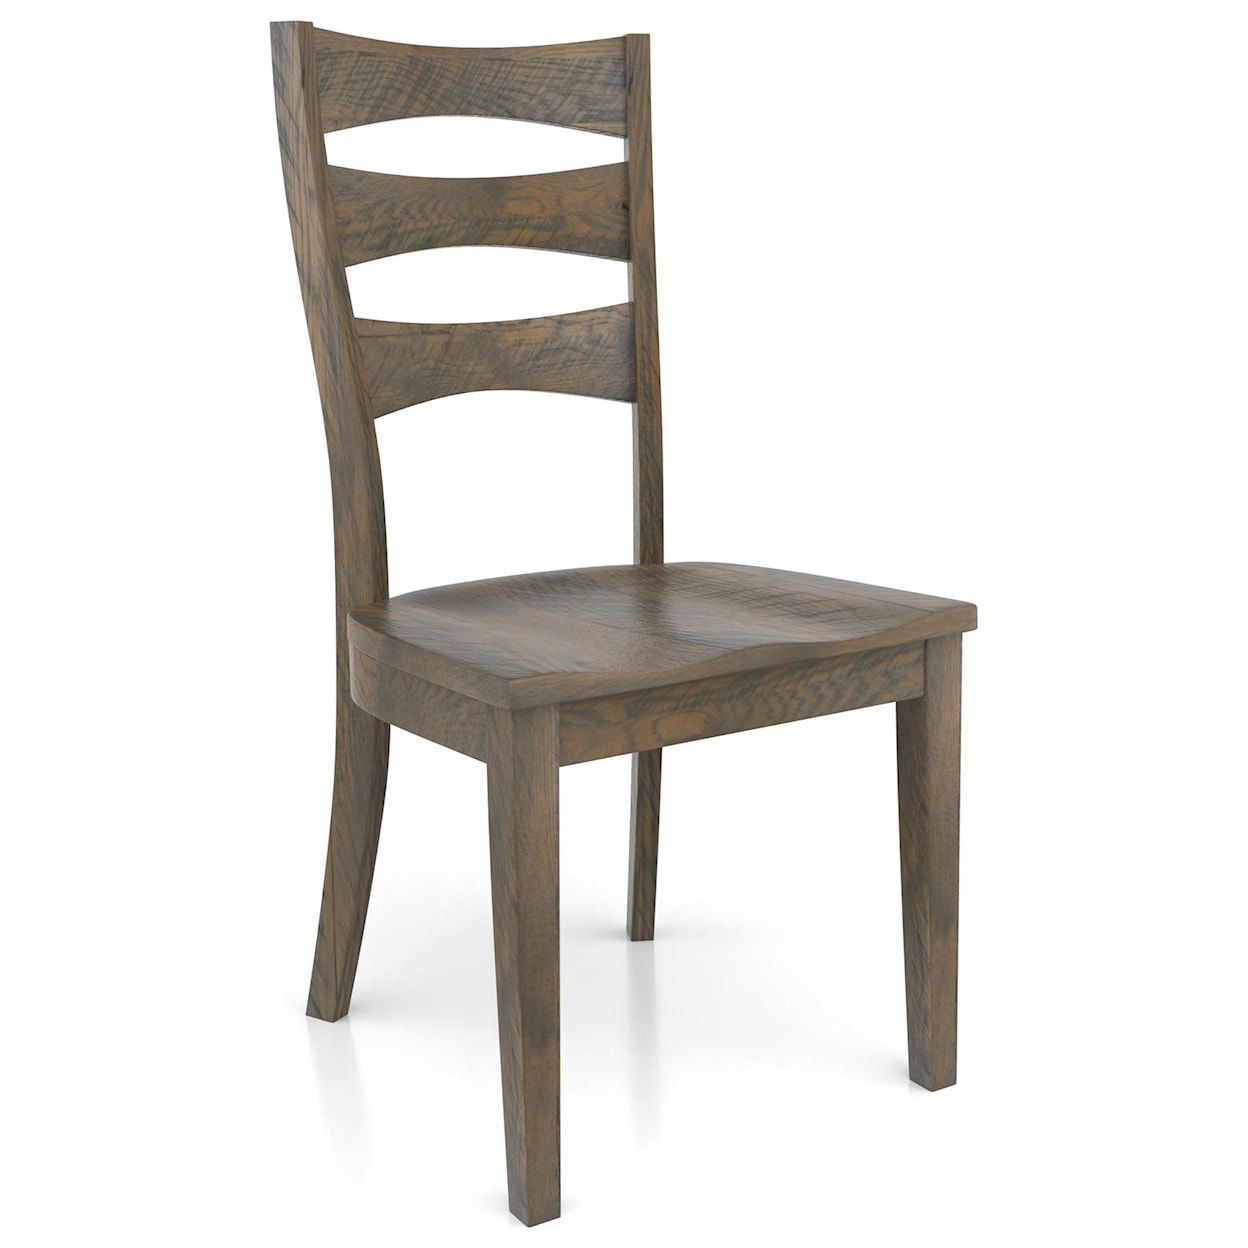 Wengerd Wood Products Kingsville Side Chair